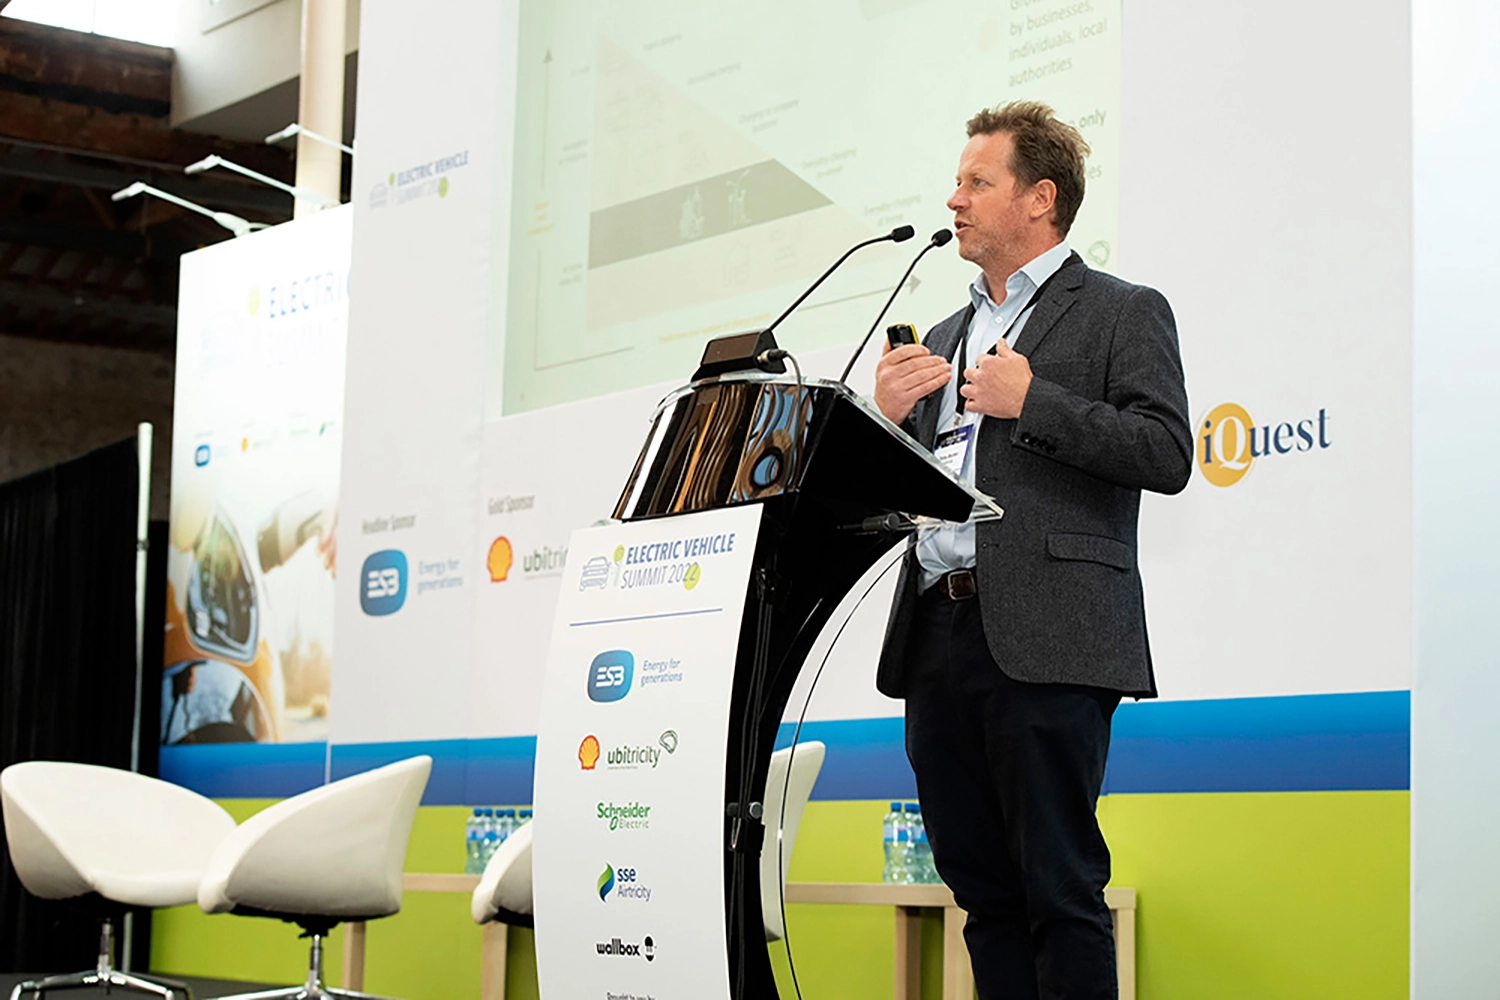 ubitricity UK managing director Toby Butler speaks about the expansion of public charging infrastructures at an emobility event in Dublin, Ireland.